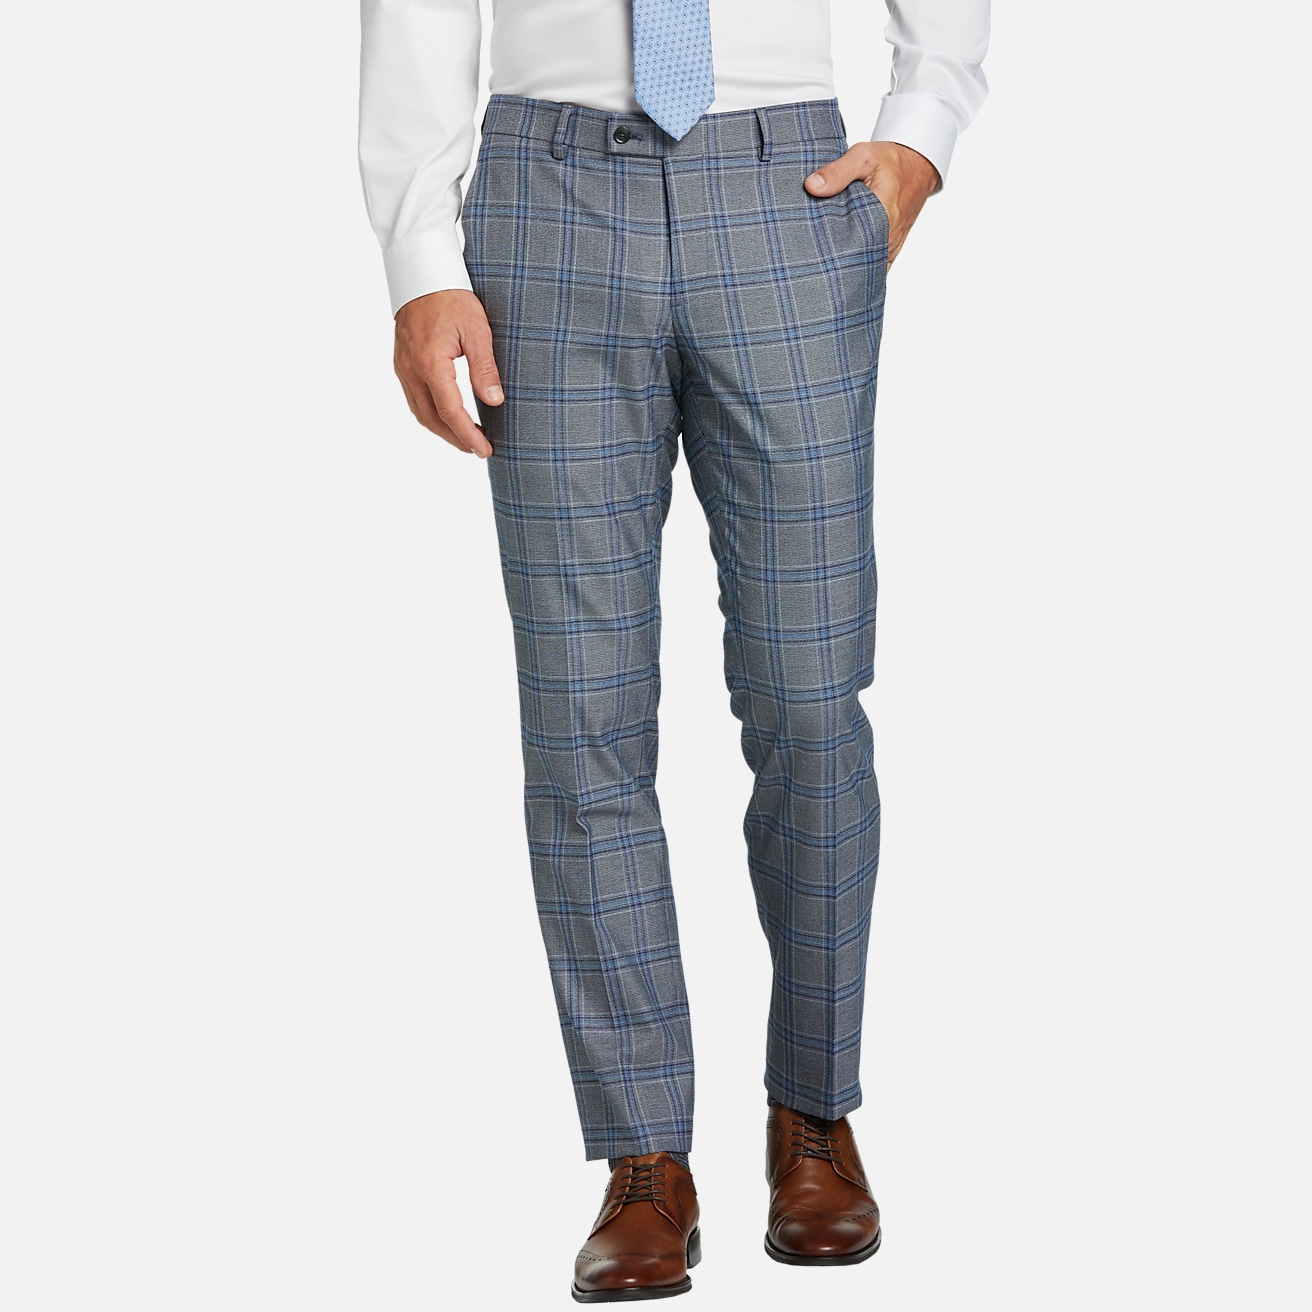 https://image.menswearhouse.com/is/image/TMW/TMW_3X22_64_EGARA_SUIT_SEPARATE_PANTS_GRAY_PLAID_MAIN?imPolicy=pdp-mob-2x